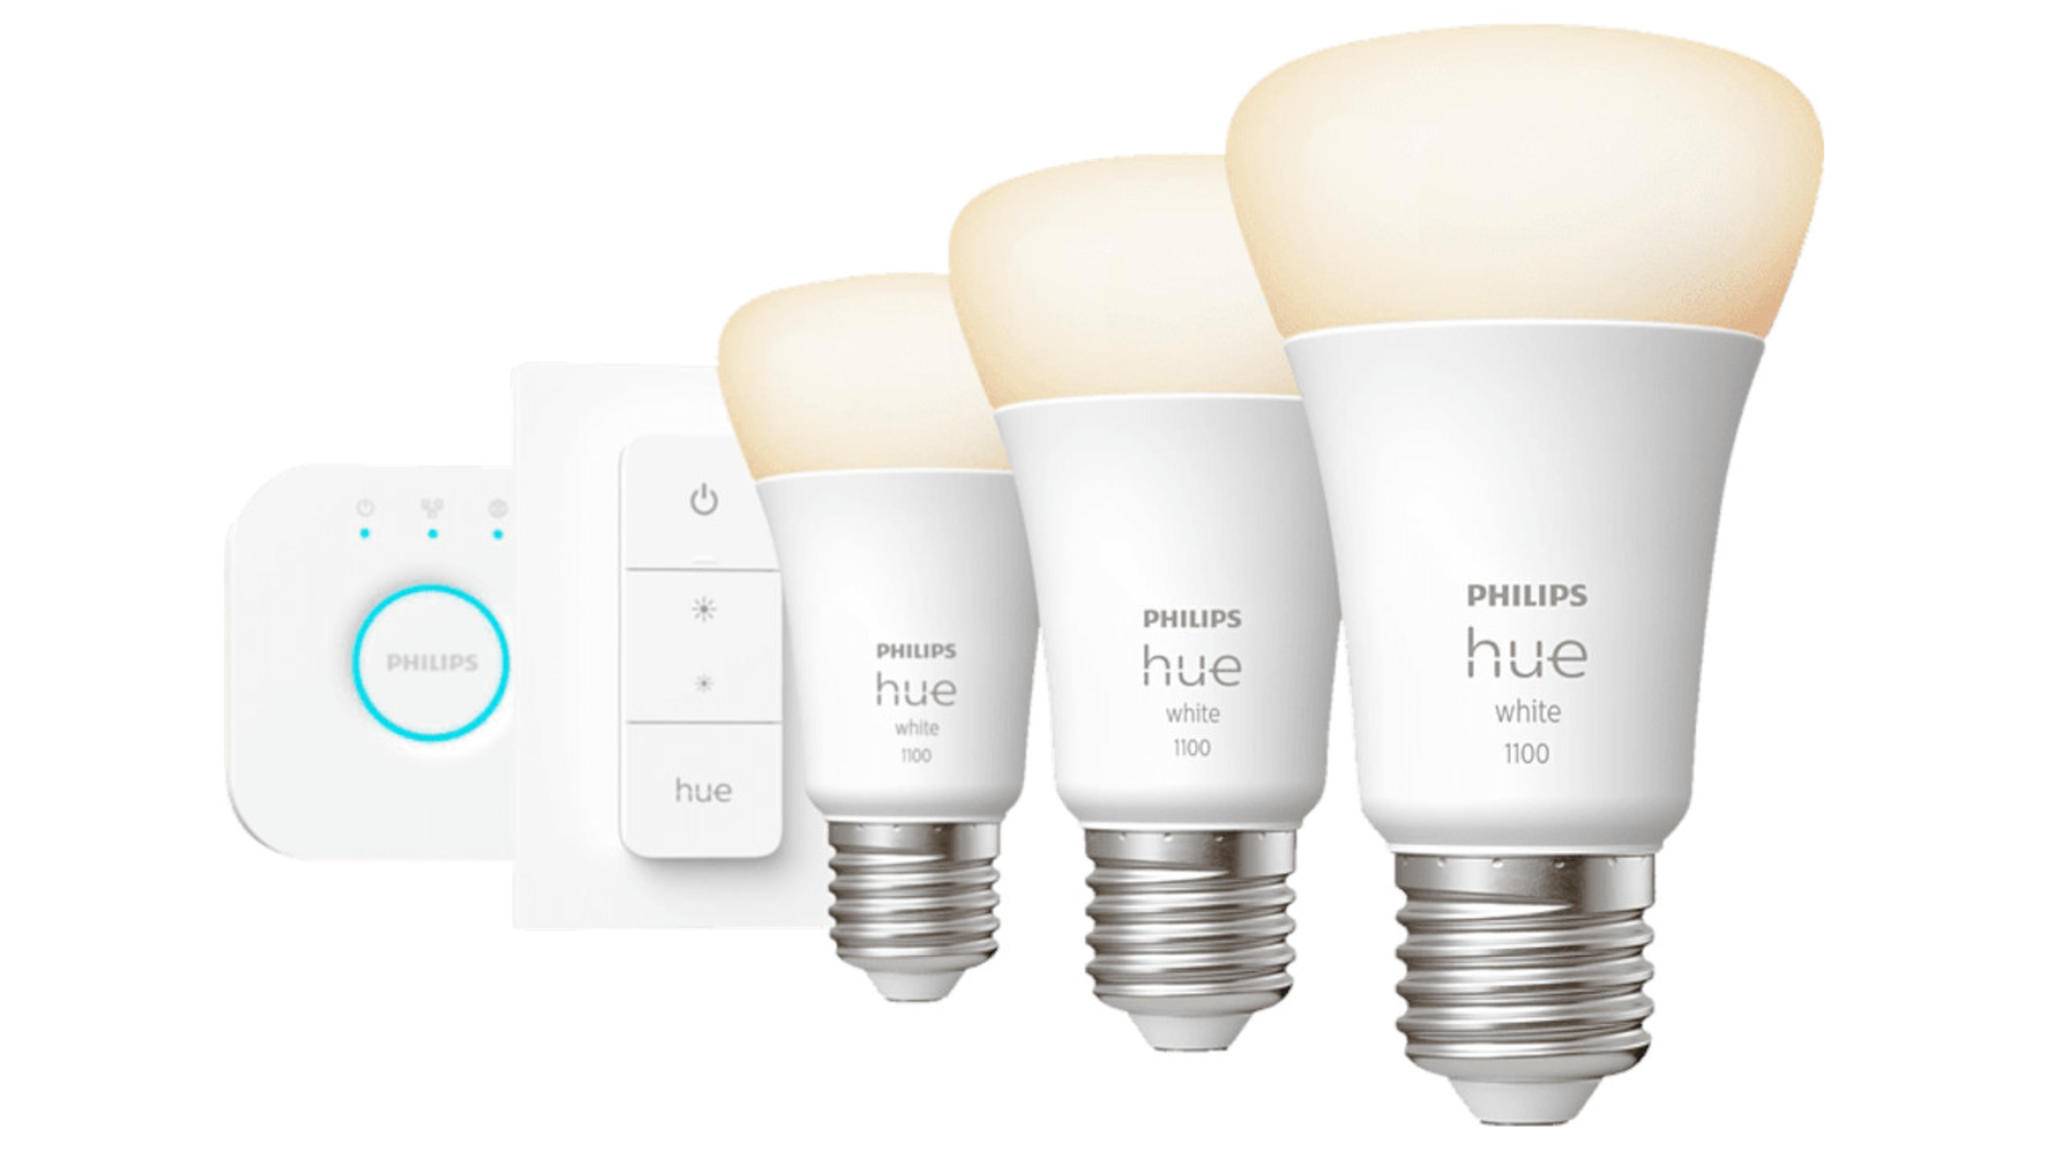 The Philips Hue White Starter Set serves as an introduction to the world of smart lights.